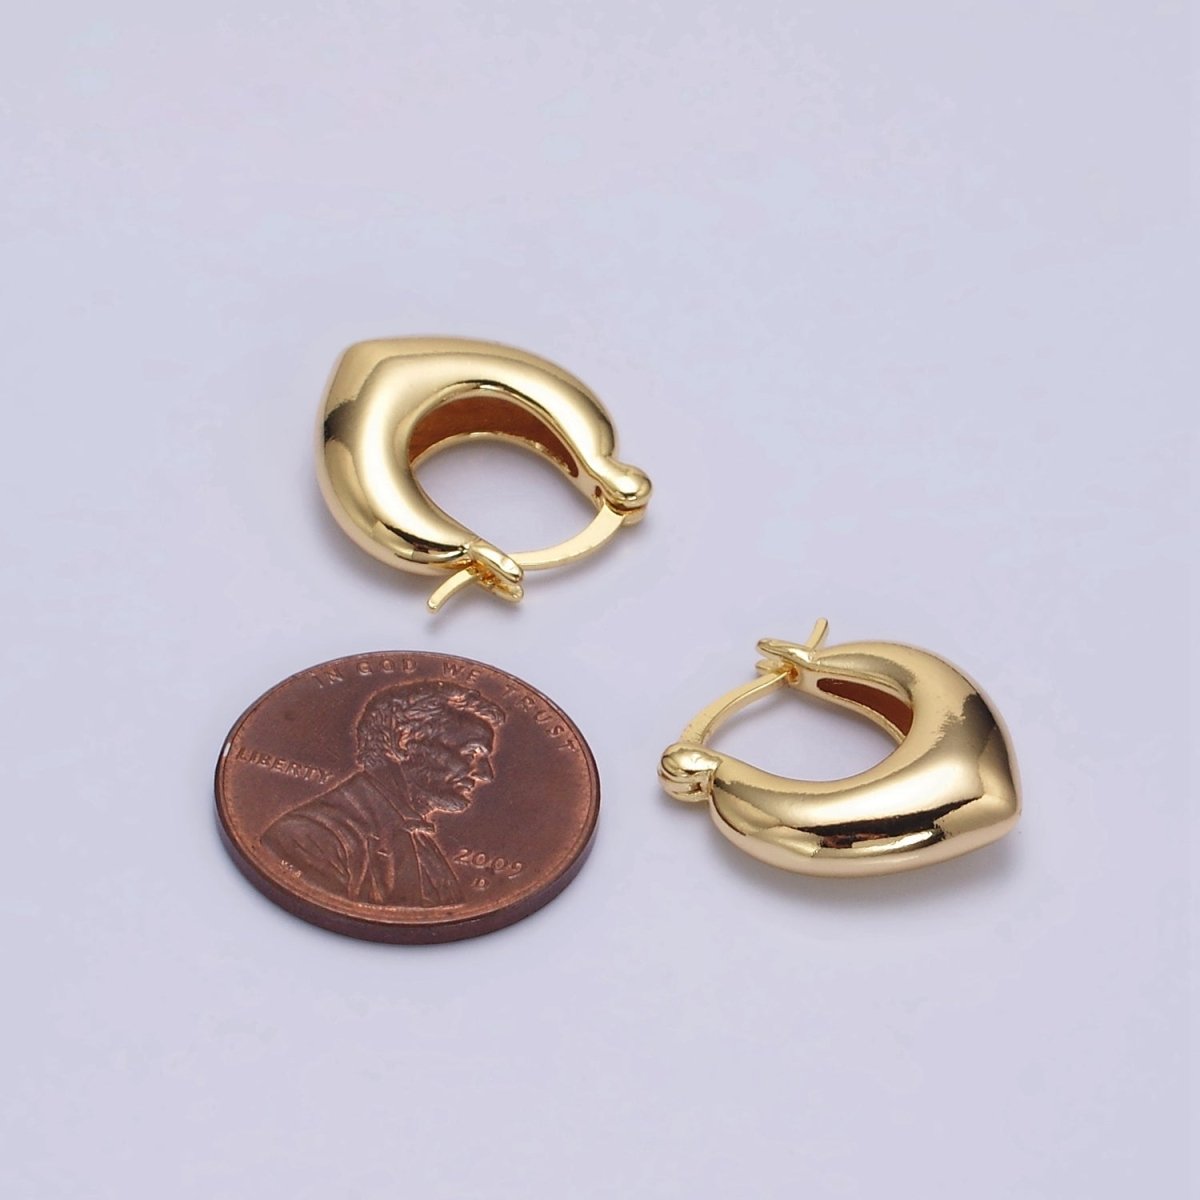 16K Gold Filled V-Shaped Dome French Lock Latch Hoop Earrings | AE574 - DLUXCA